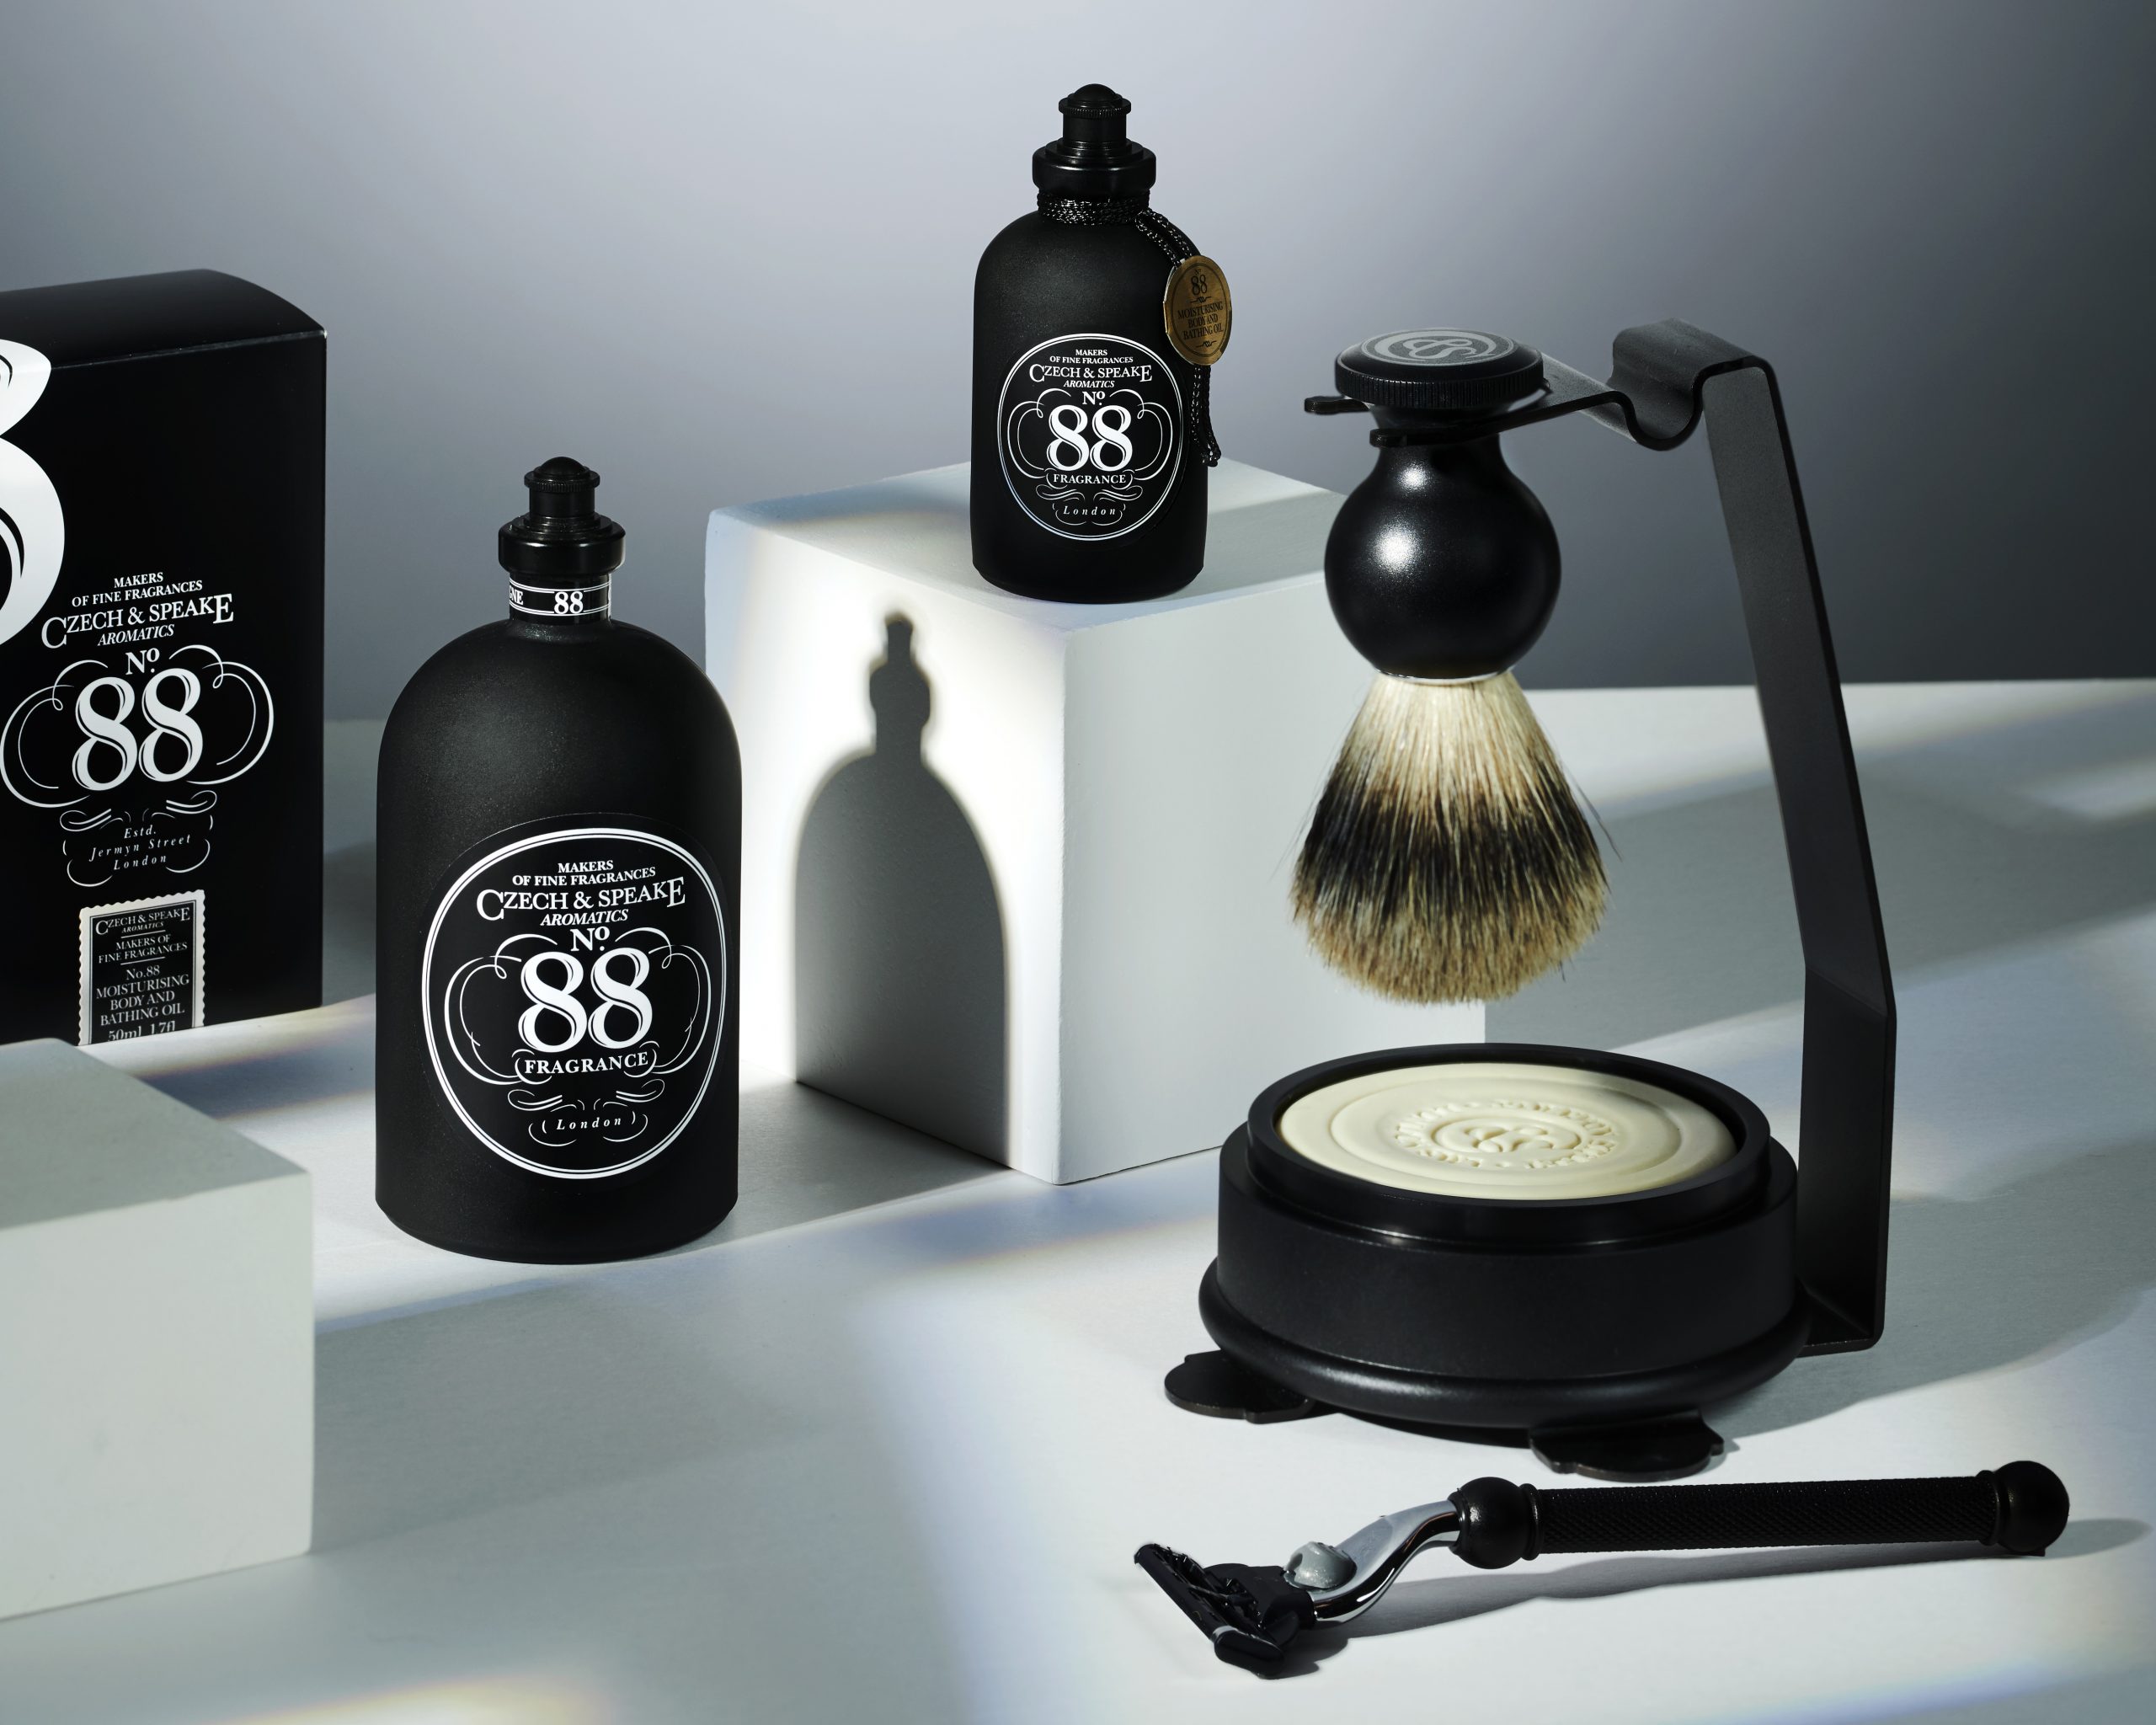 Minimal scene with white blocks and the No.88 collection. No.88 Cologne 200ml, No.88 Moisturising Bath & Body Oil and the No.88 Shaving Set & Stand.